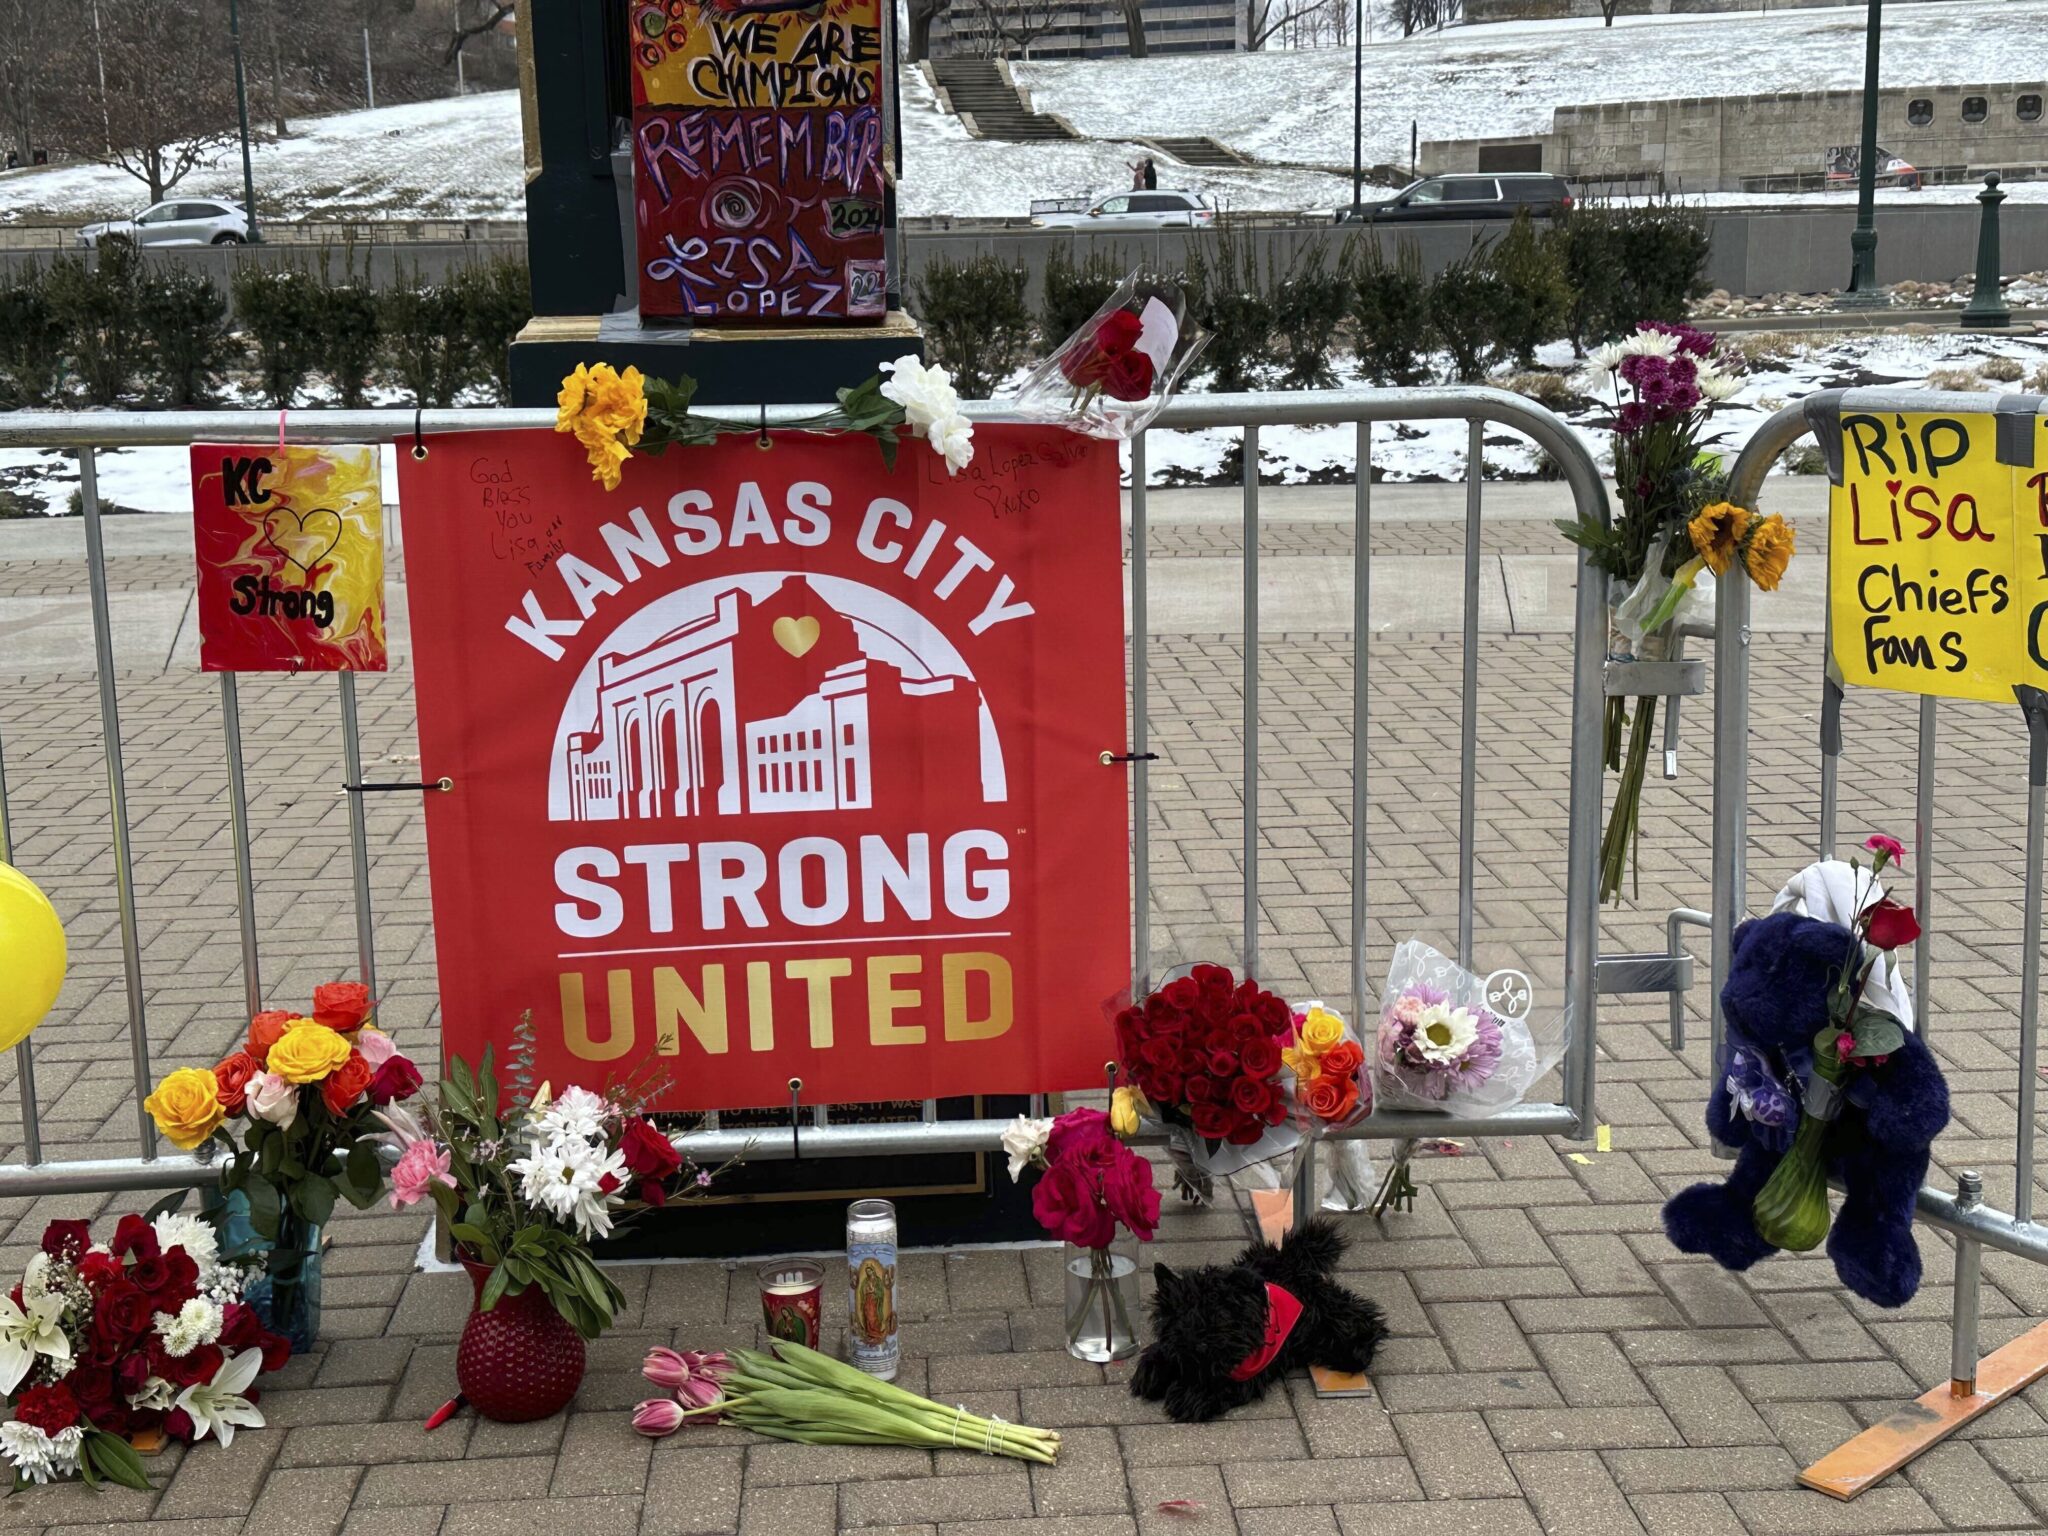 Why The Media Didn’t Report the Names of the Chiefs Parade Shooting Suspects (mediaite.com)